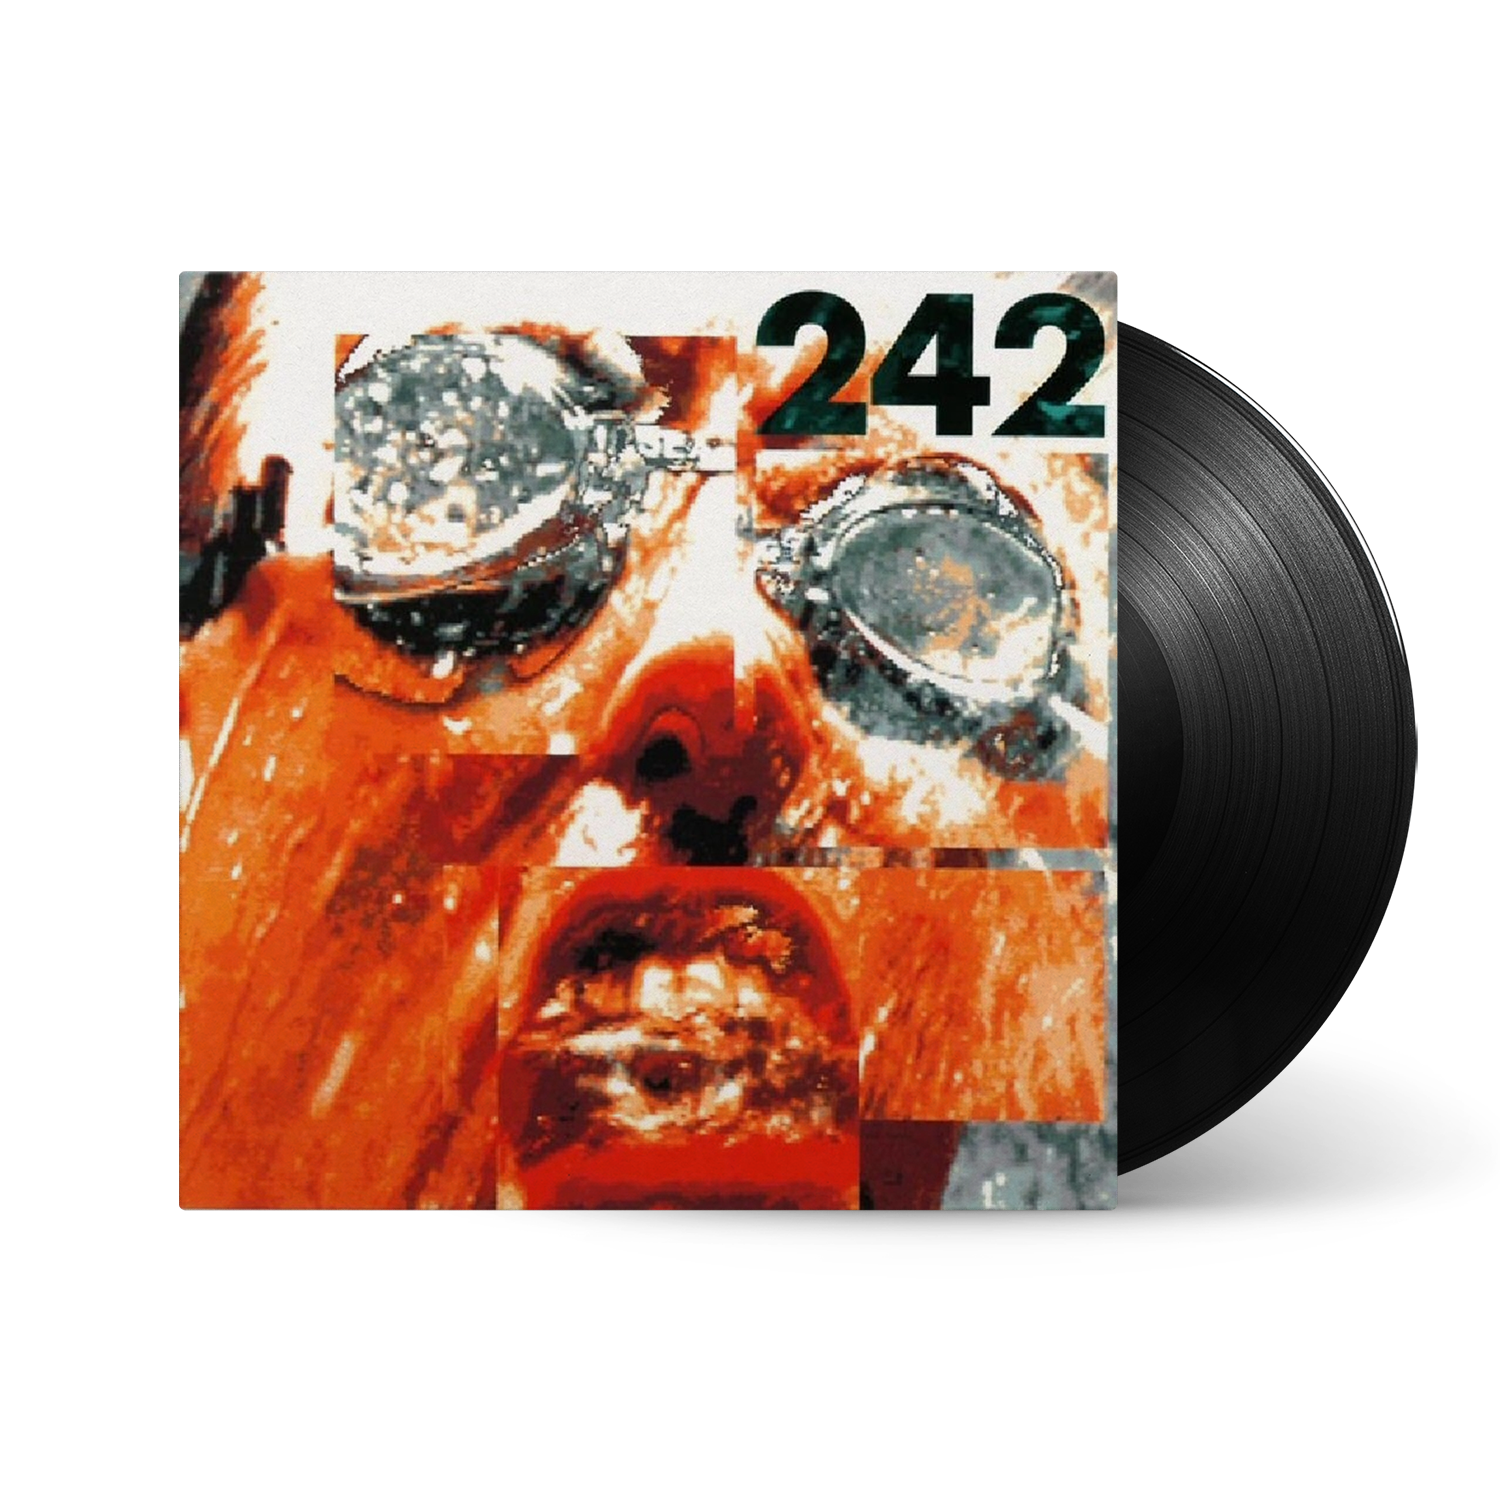 Front 242 - Tyranny For You: Vinyl LP